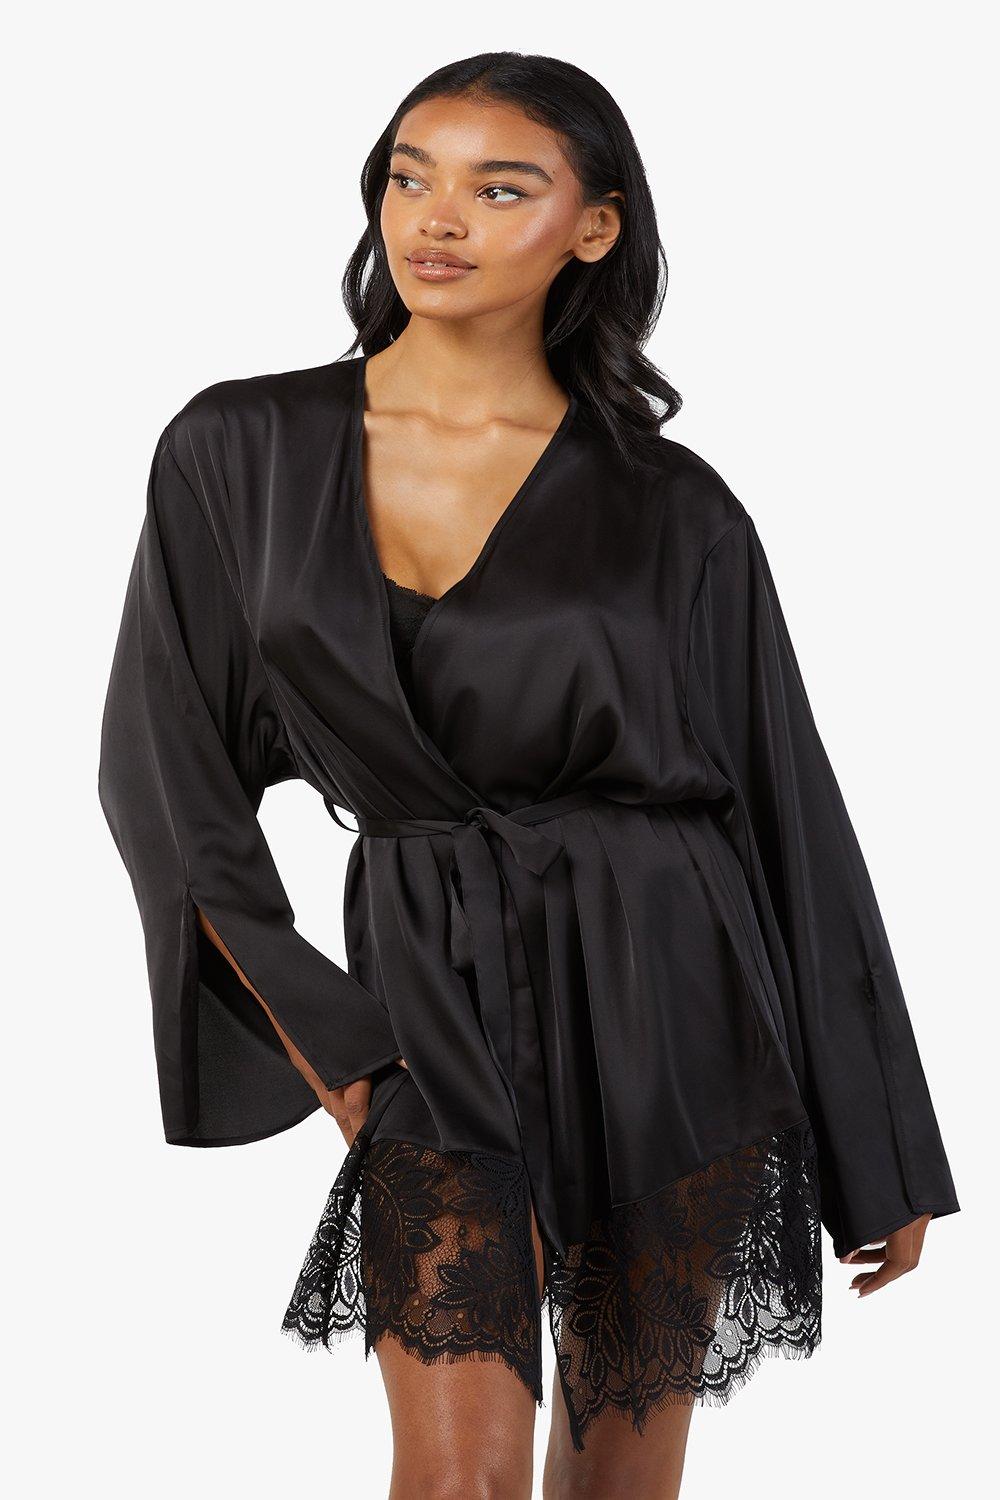 Wolf & Whistle Rosie Satin and Lace Robe, Red at John Lewis & Partners